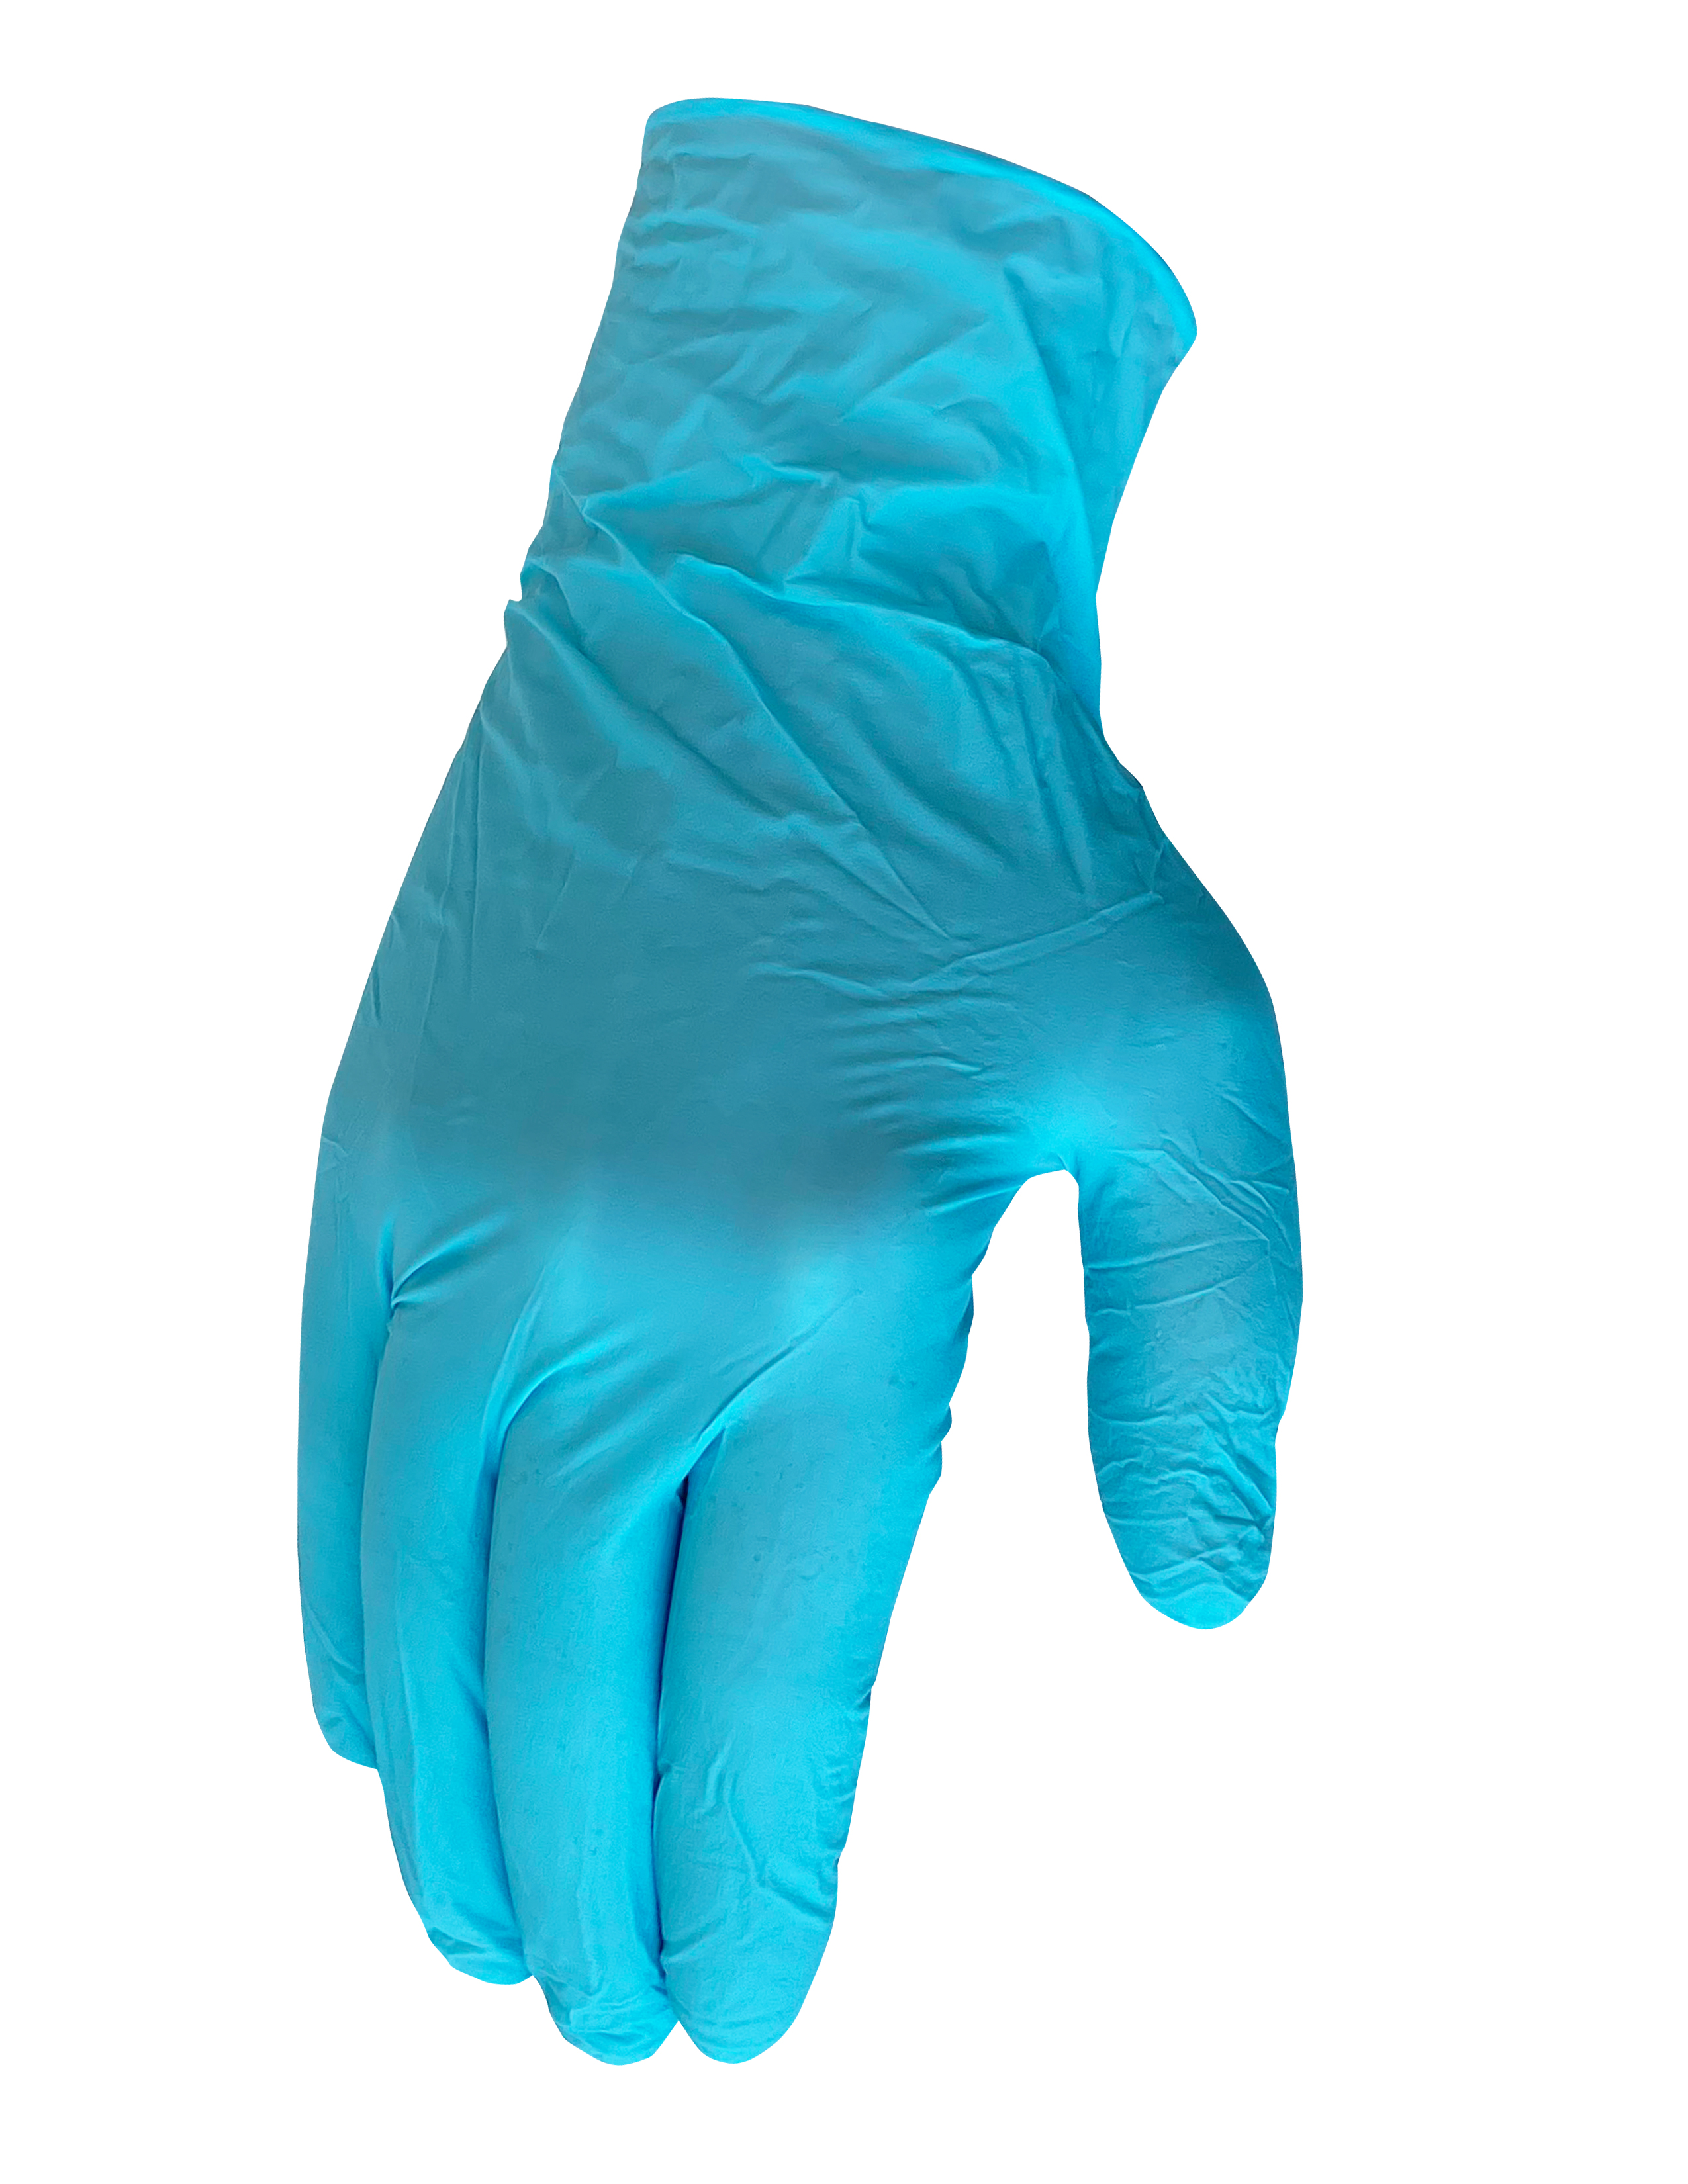 AWP Pro Paint 49810-14 Disposable Gloves, Nitrile, Blue, One Size, 50 Count - image 3 of 6